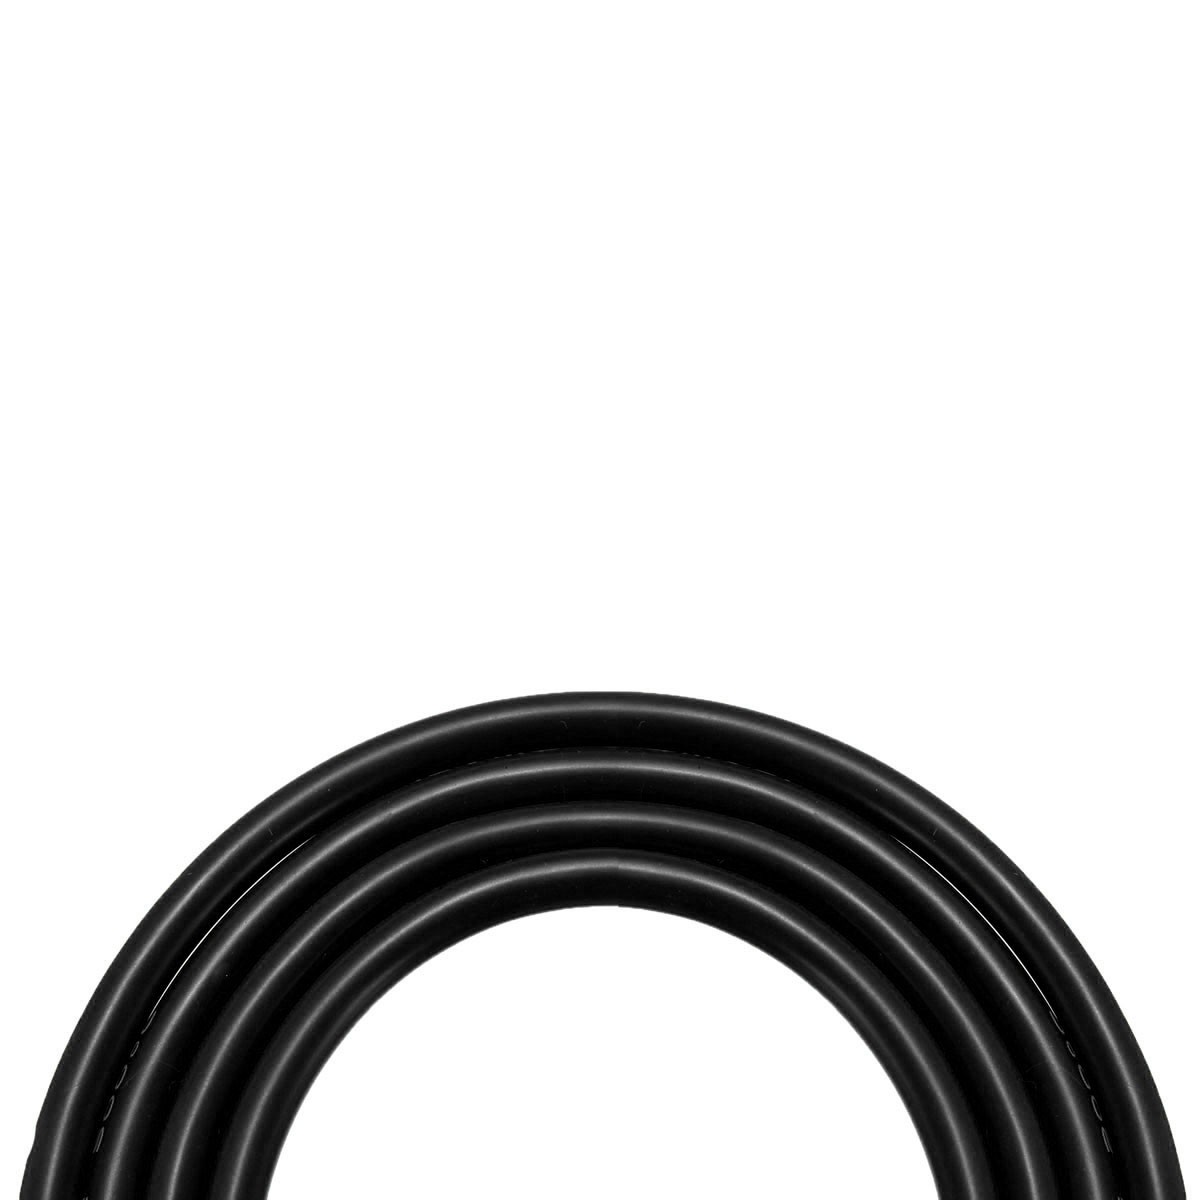 DANIU-1-Meter-Black-Silicone-Wire-Cable-10121416182022AWG-Flexible-Cable-1170273-9